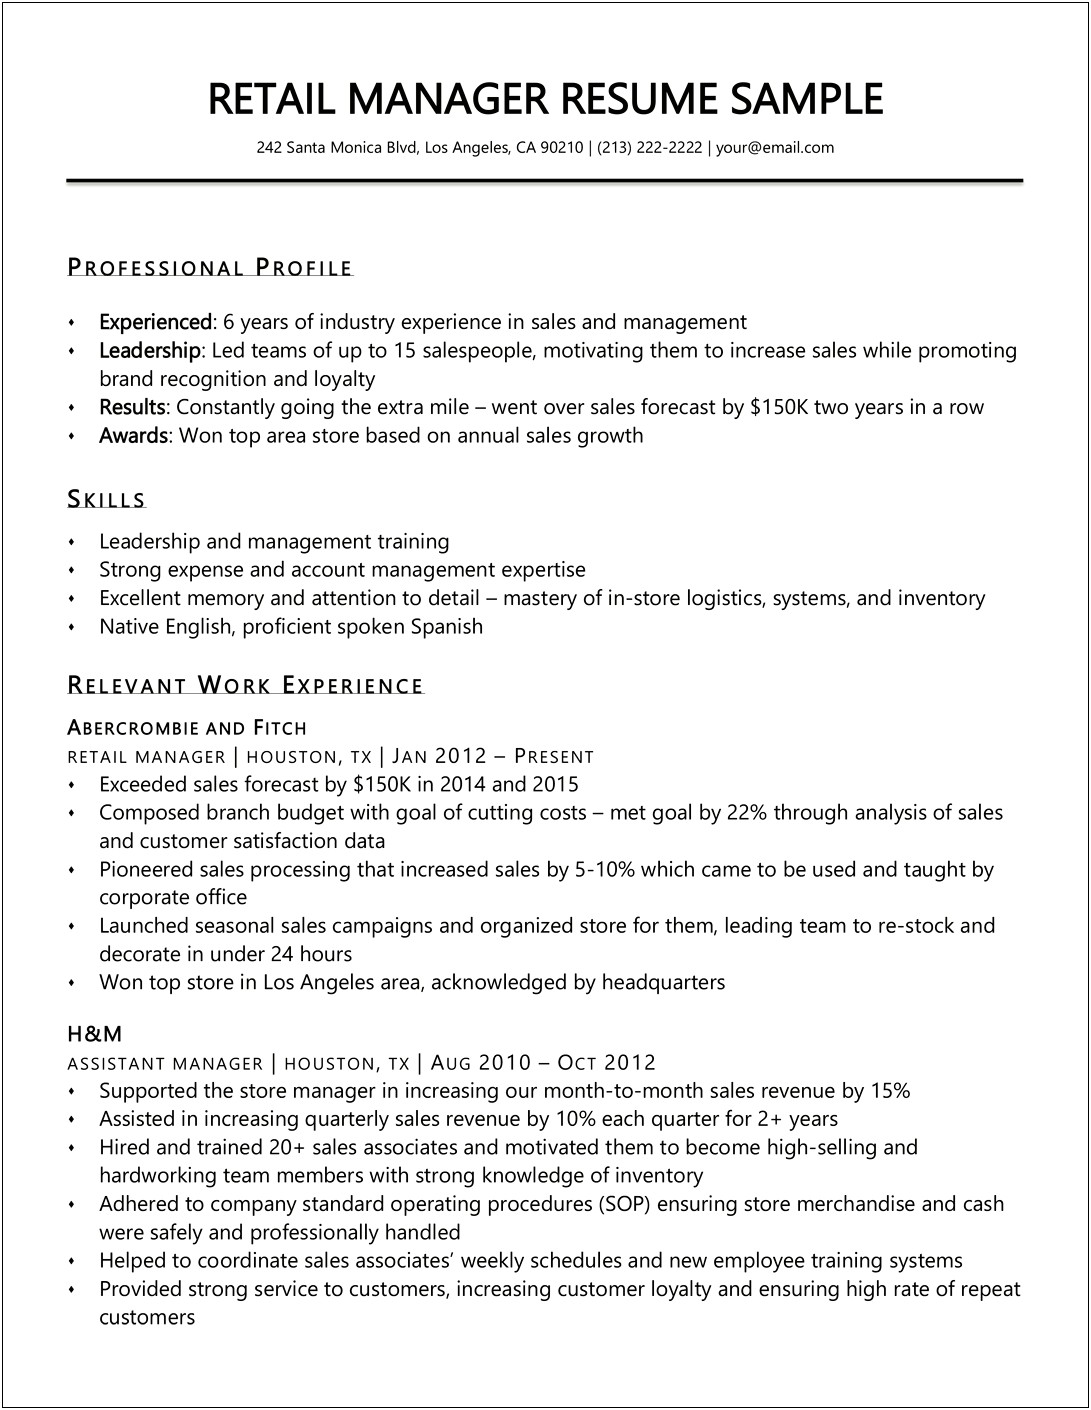 Sample Skill Resume For Retail Department Manager